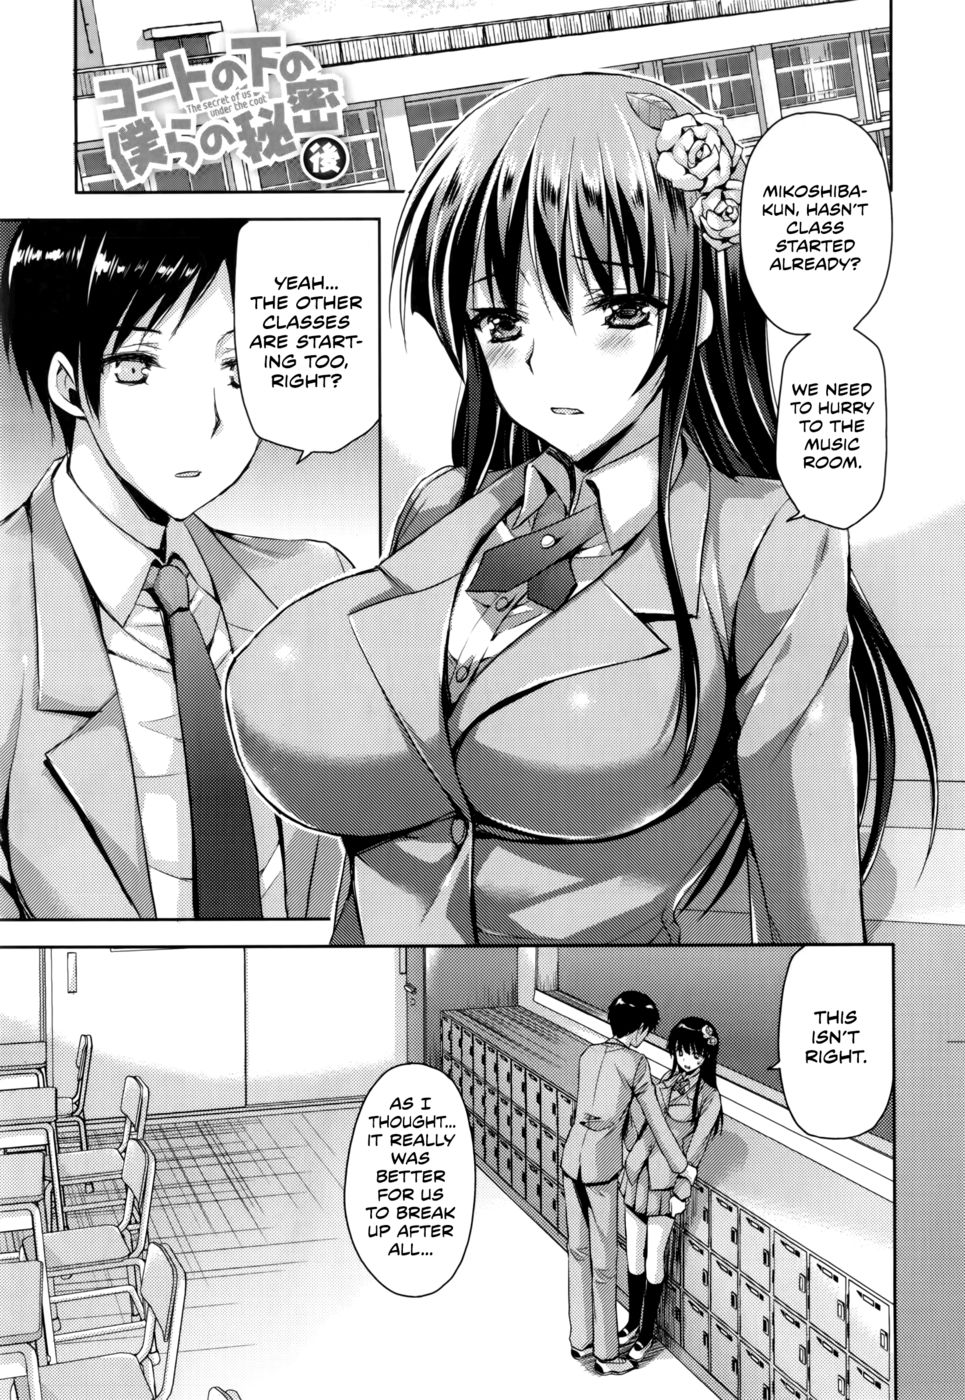 Hentai Manga Comic-The Secret of Us Under the Coat-Chapter 3 - end-1